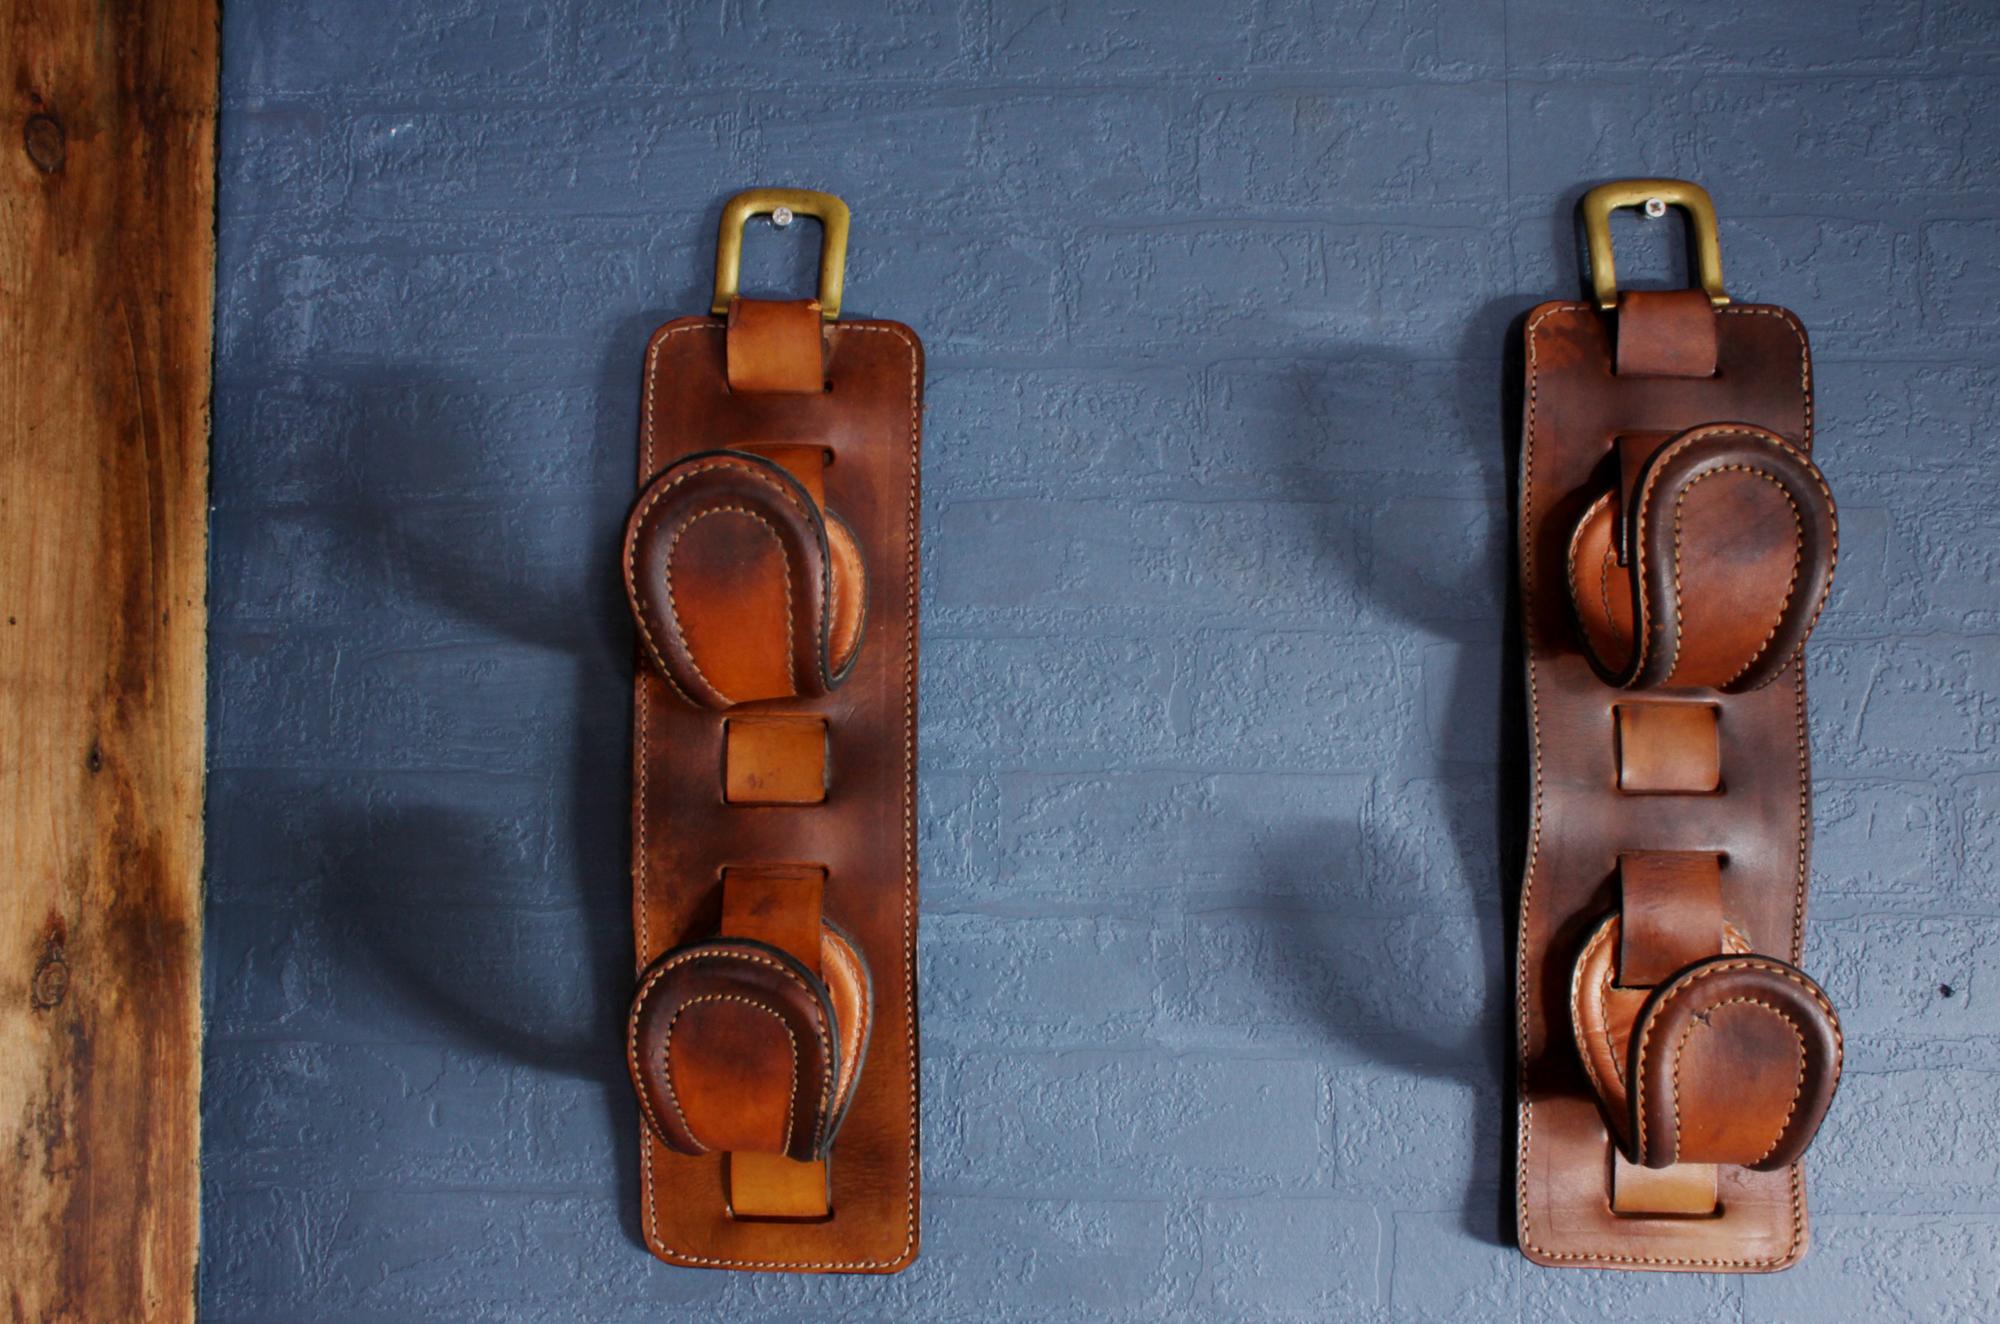 Pair of leather wine holders by Jacques Adnet, circa 1940.

A pair of two hook leather wine holders or gun rack by Jacques Adnet, a win bottle fits into the hooks, they are in thick saddlery hide leather with good stitch detailing and brass tops